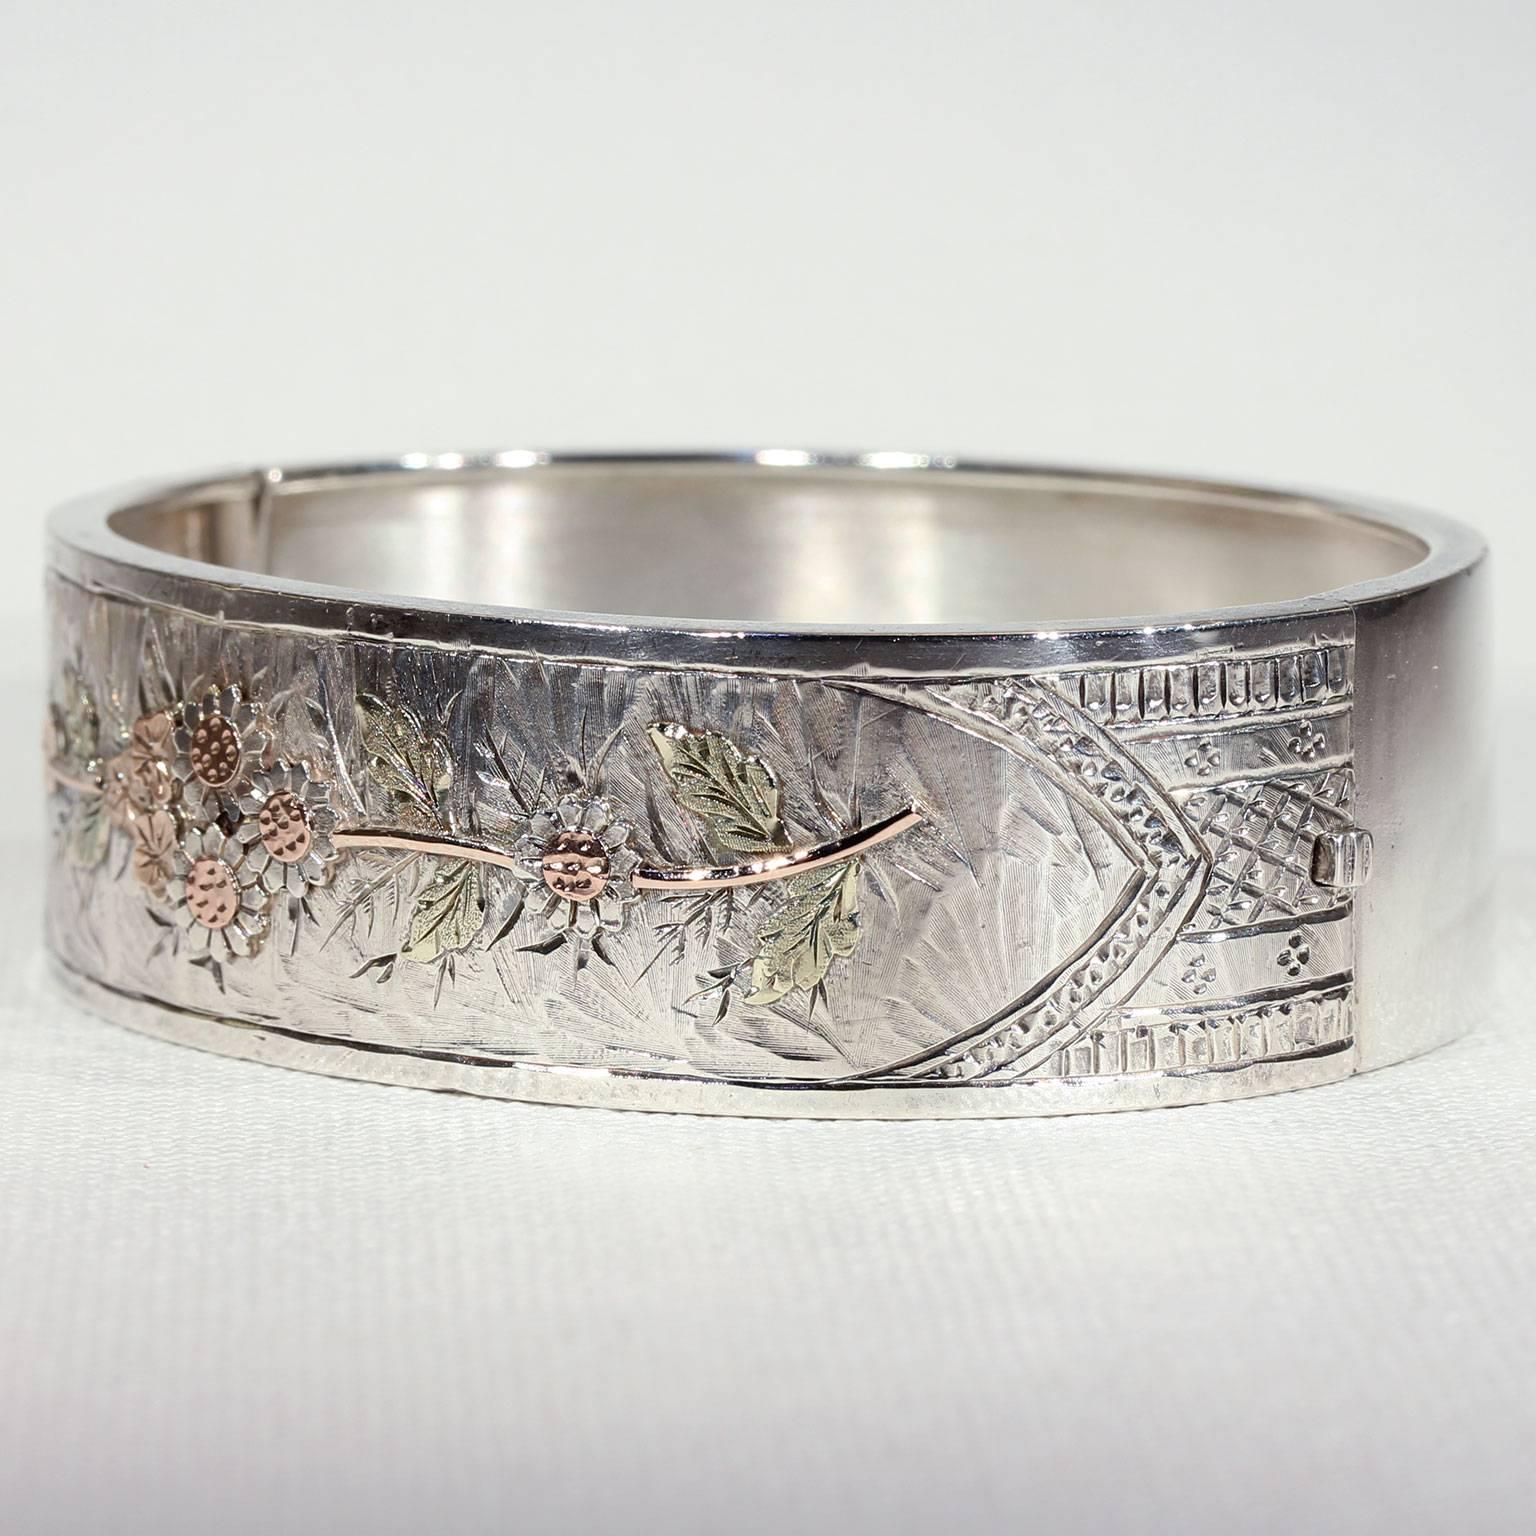 This stunning antique Victorian silver bangle was handcrafted in Birmingham, England, in 1882. It features a fully worked flower motif with rose colored stems and petals, as well as perfectly green leaves. It’s engraved with tiny squares and